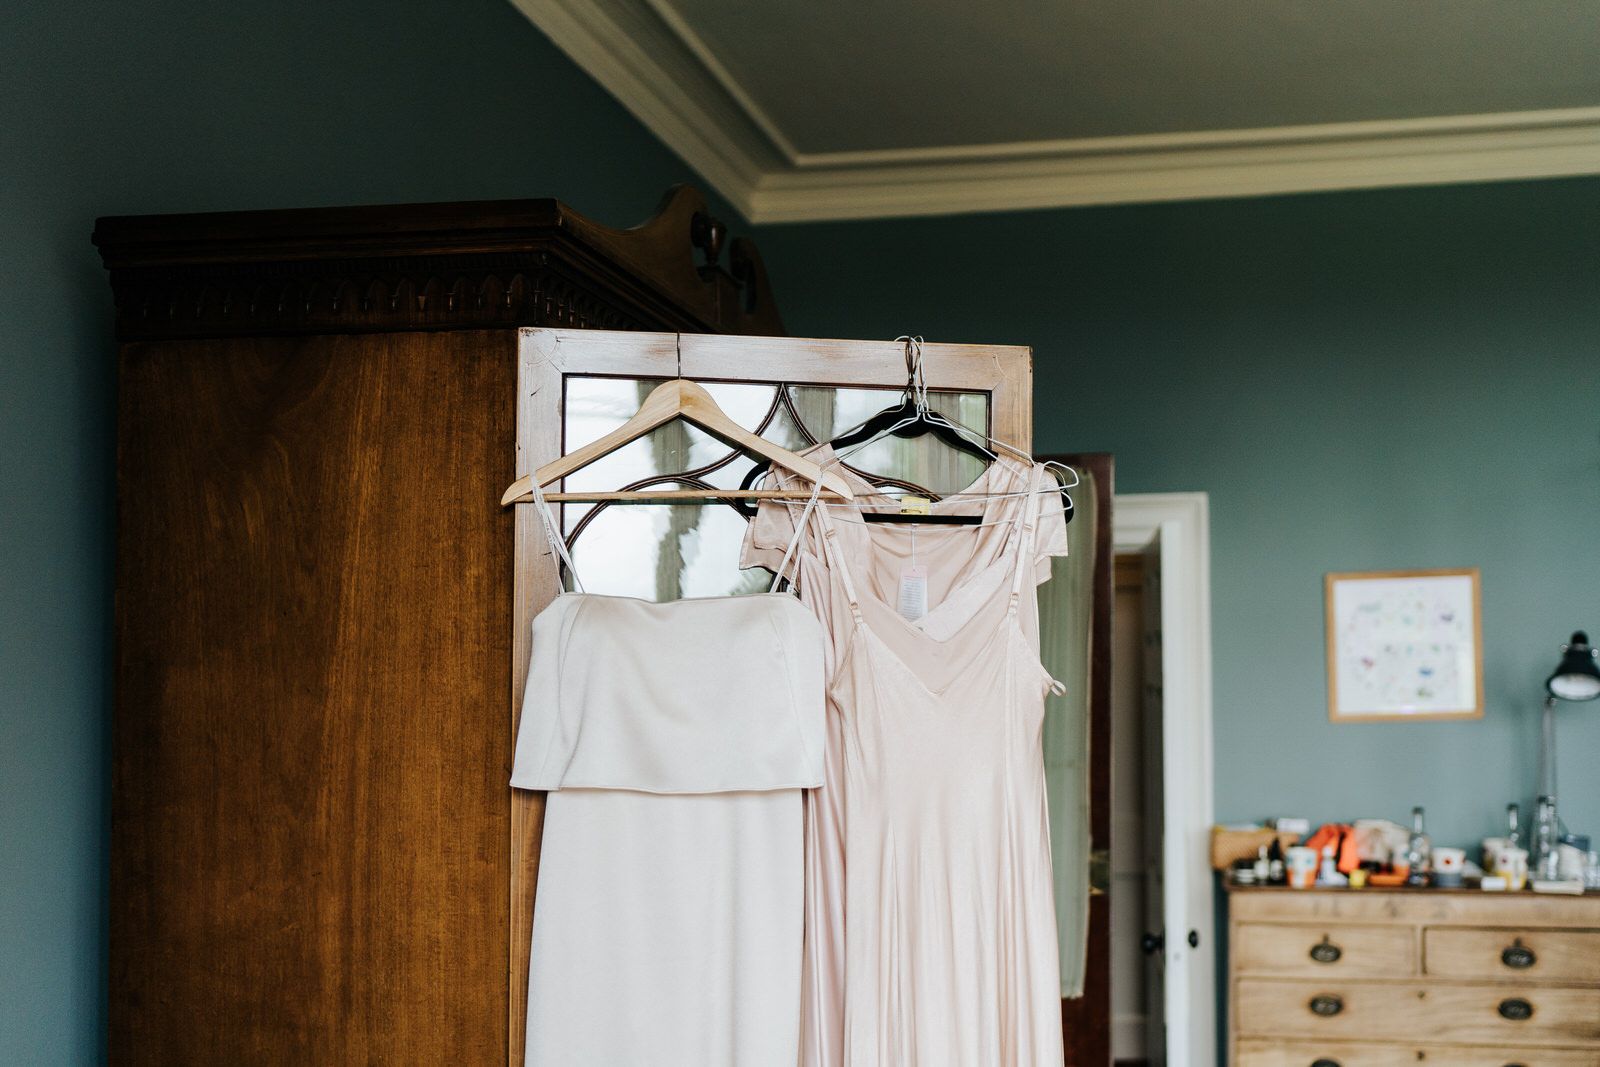  Bridesmaid dresses hang on the door of a closet in dressing room 